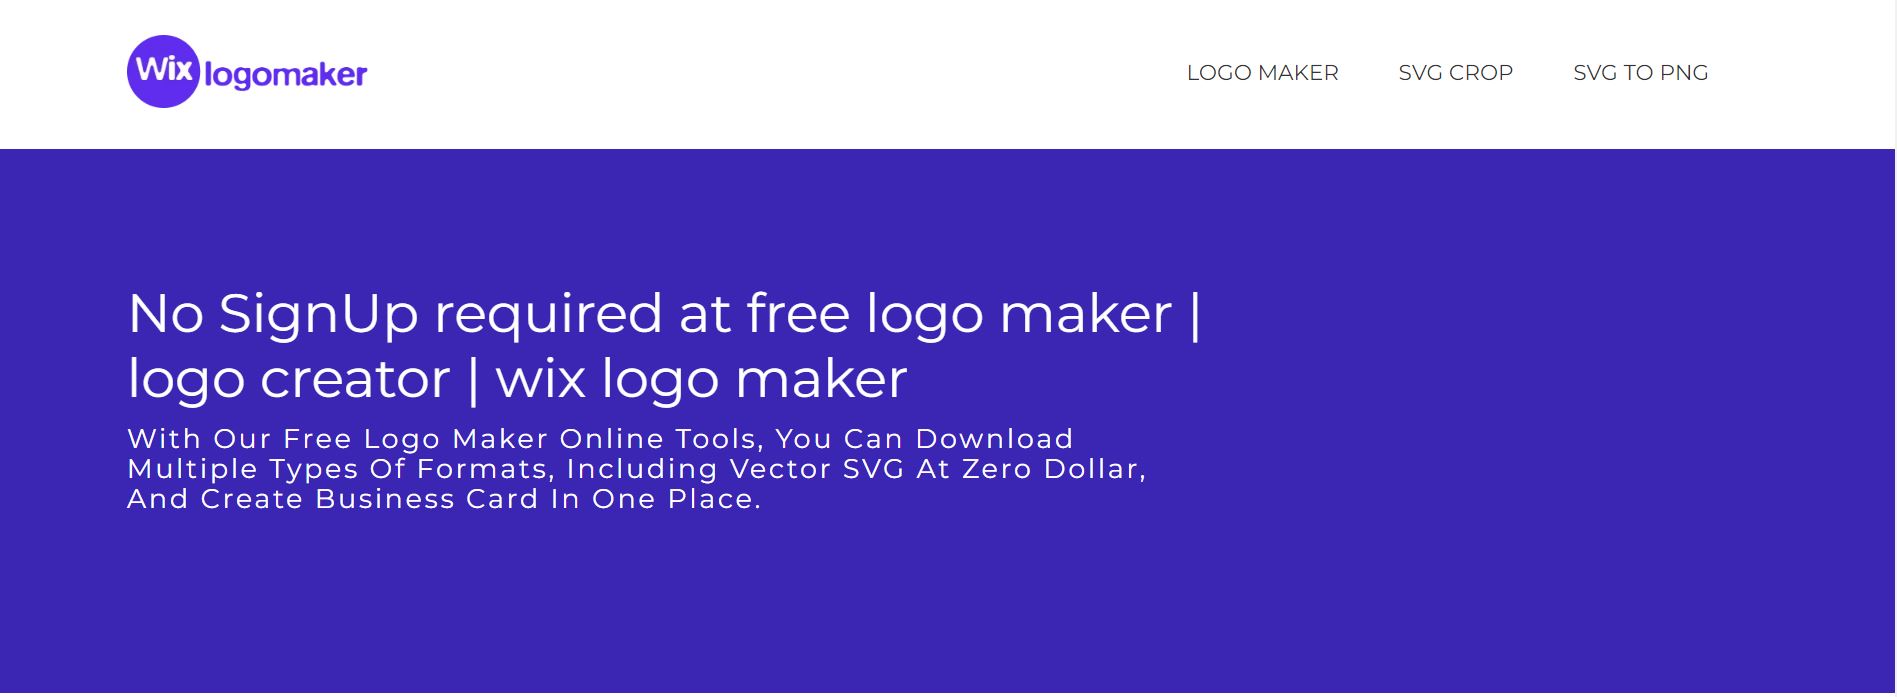 Free logo maker to grow your business